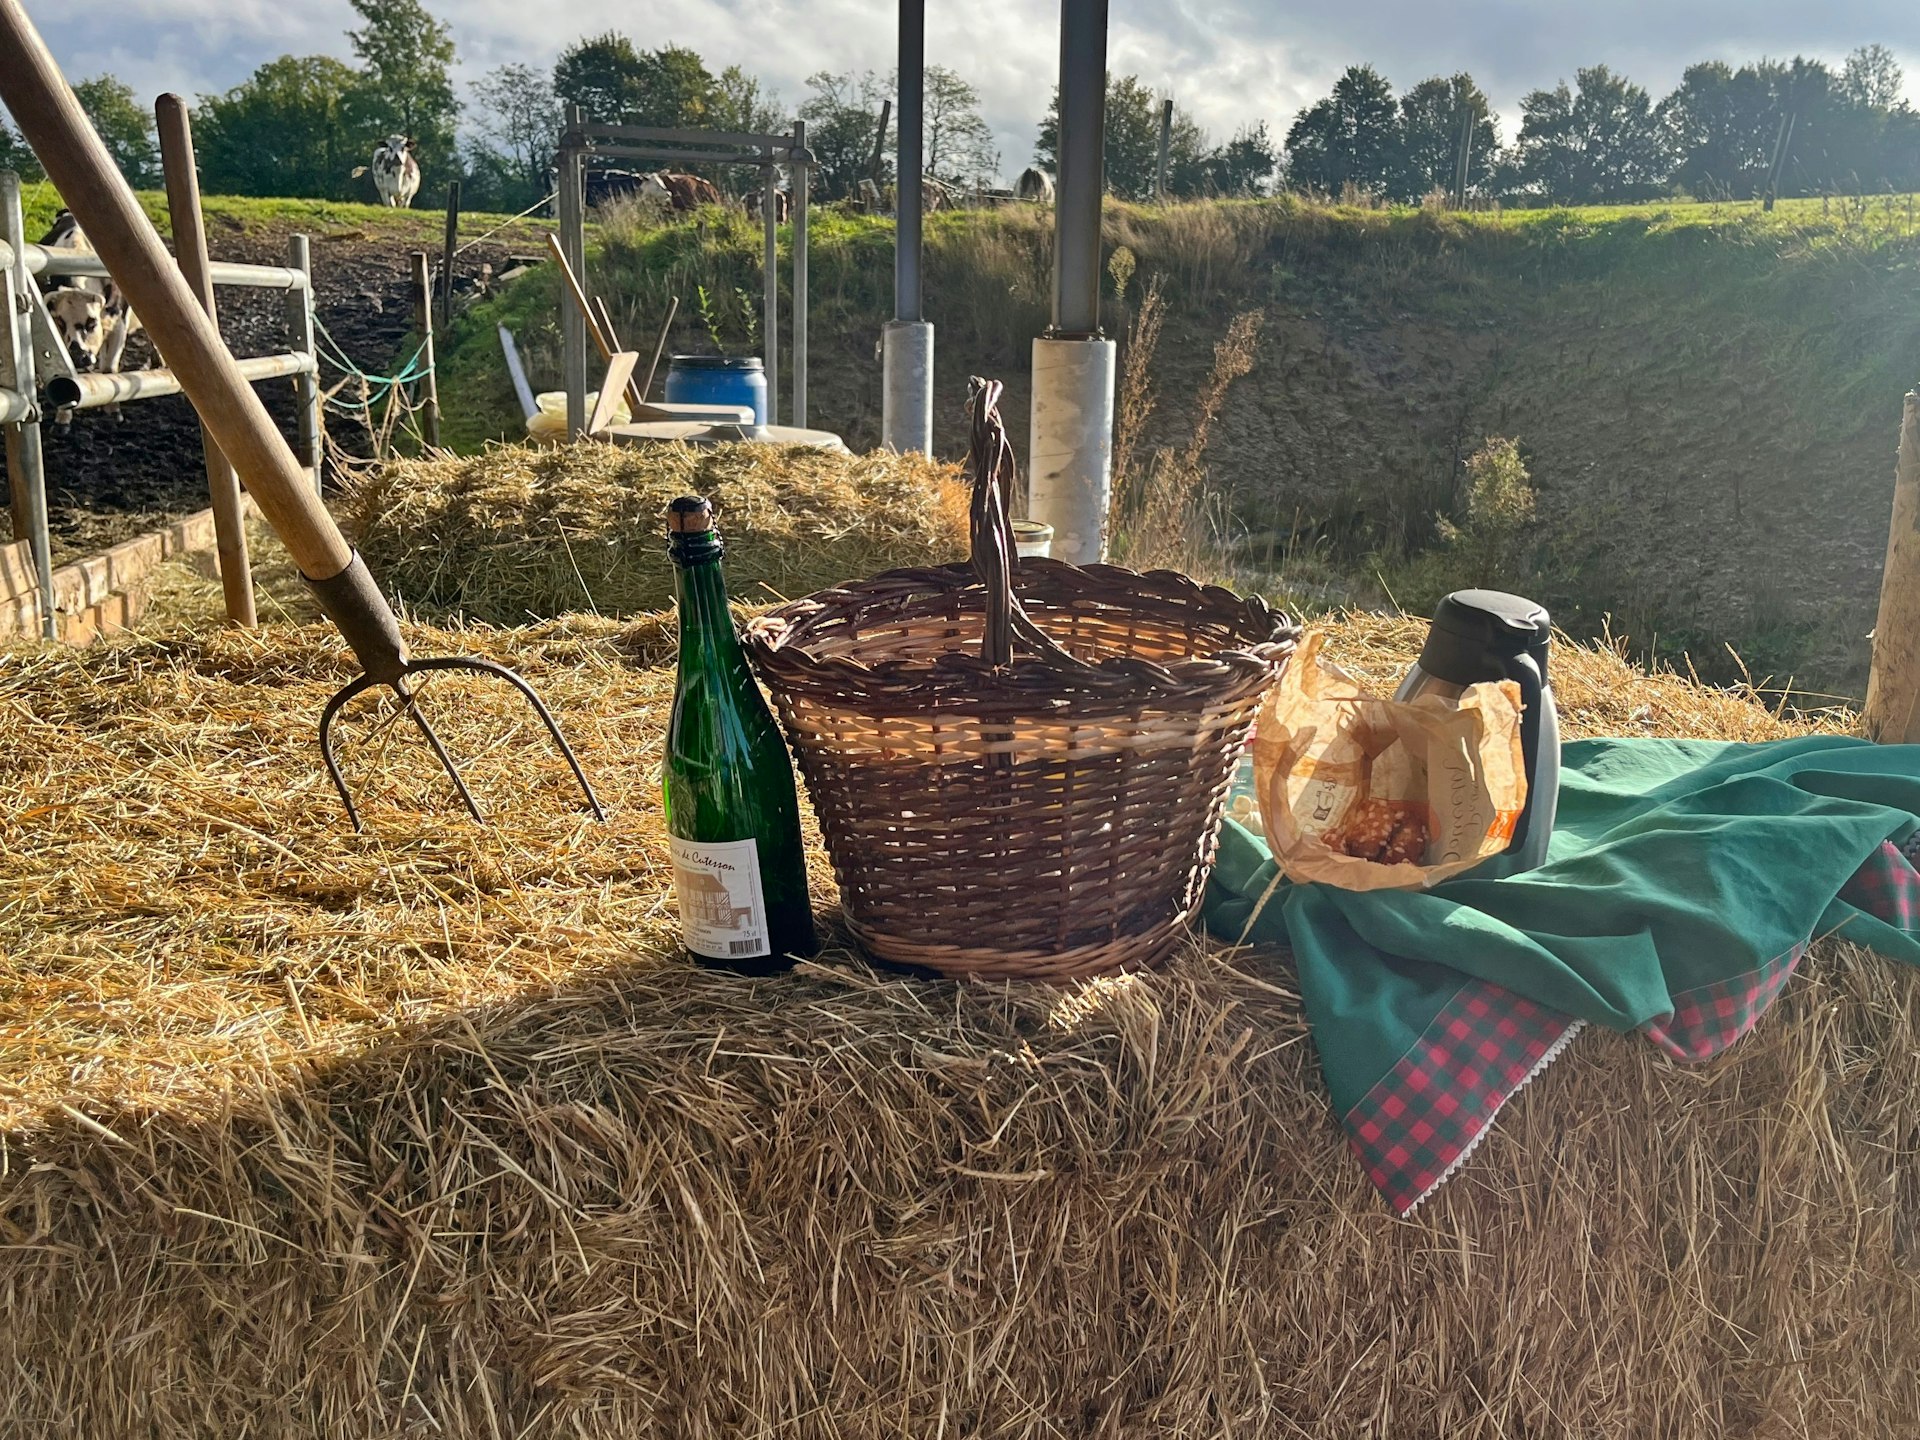 Milk, butter and cheese displayed with a picnic blanket on a bale of hay in a farm